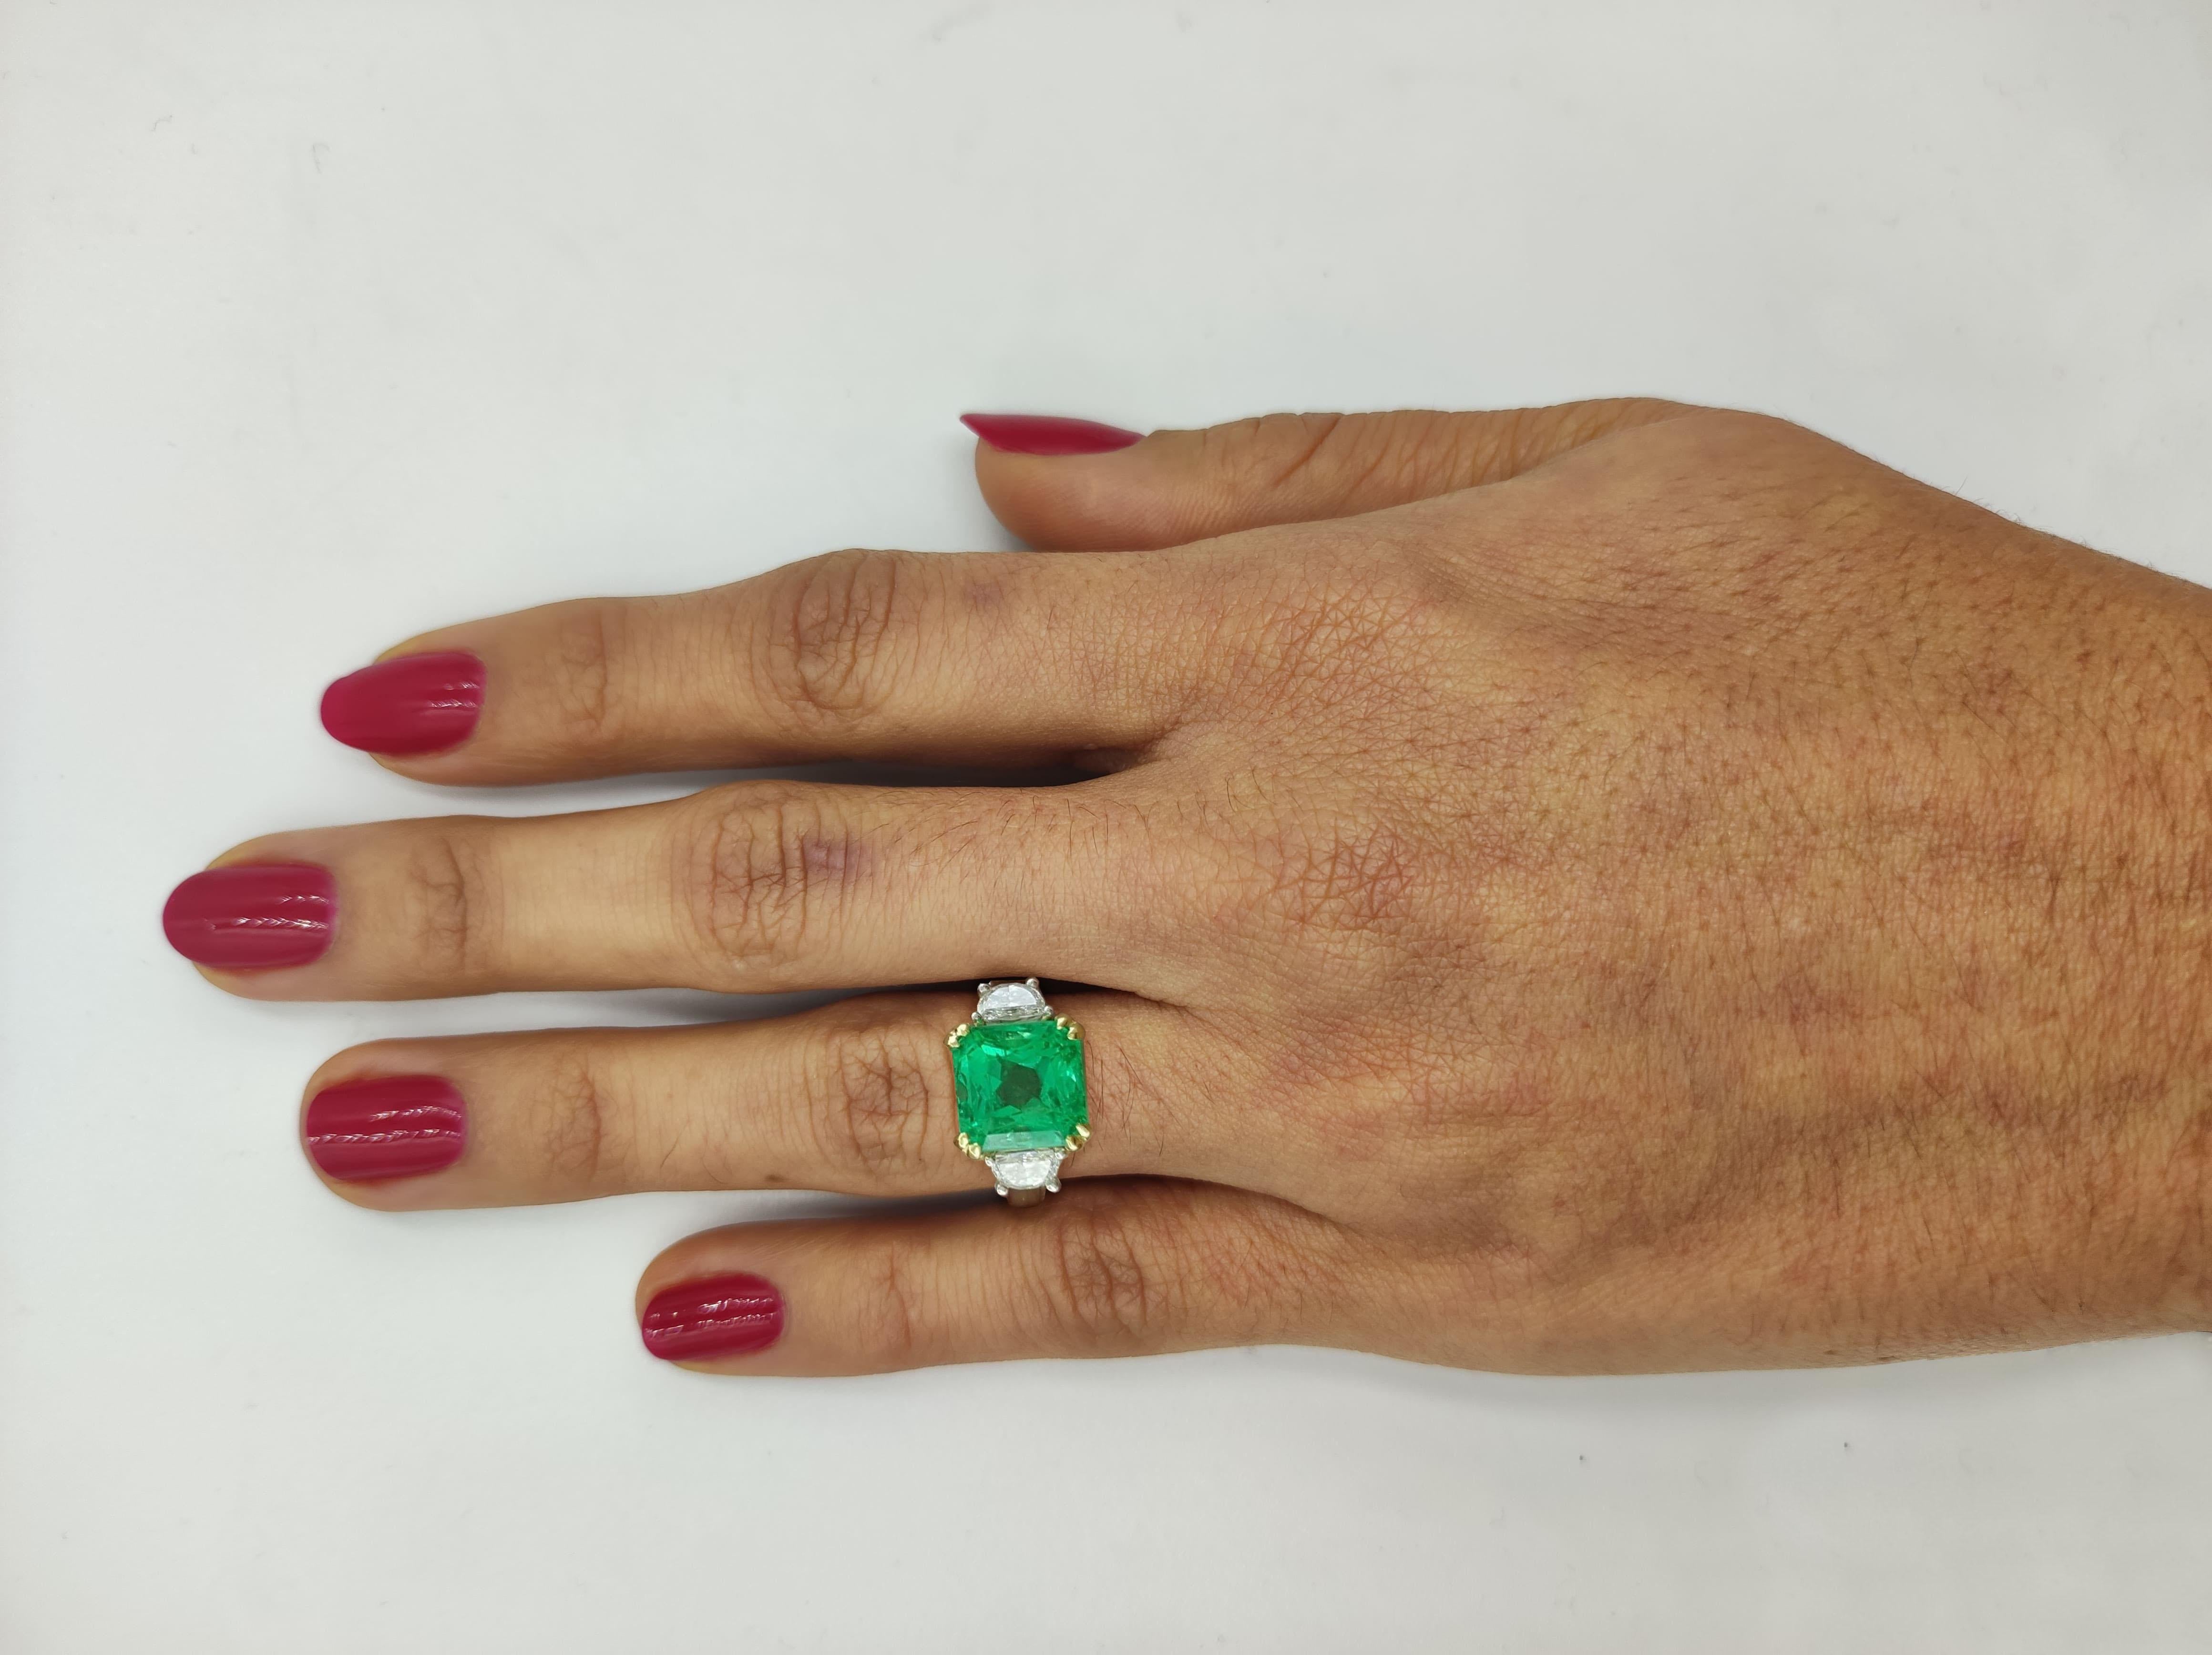 This exquisite colombian emerald ring combination forms a stunning piece of jewelry, whether it's an engagement ring or a statement accessory. The contrast between the substantial emerald-cut diamond and the sophisticated trapezoid side stones